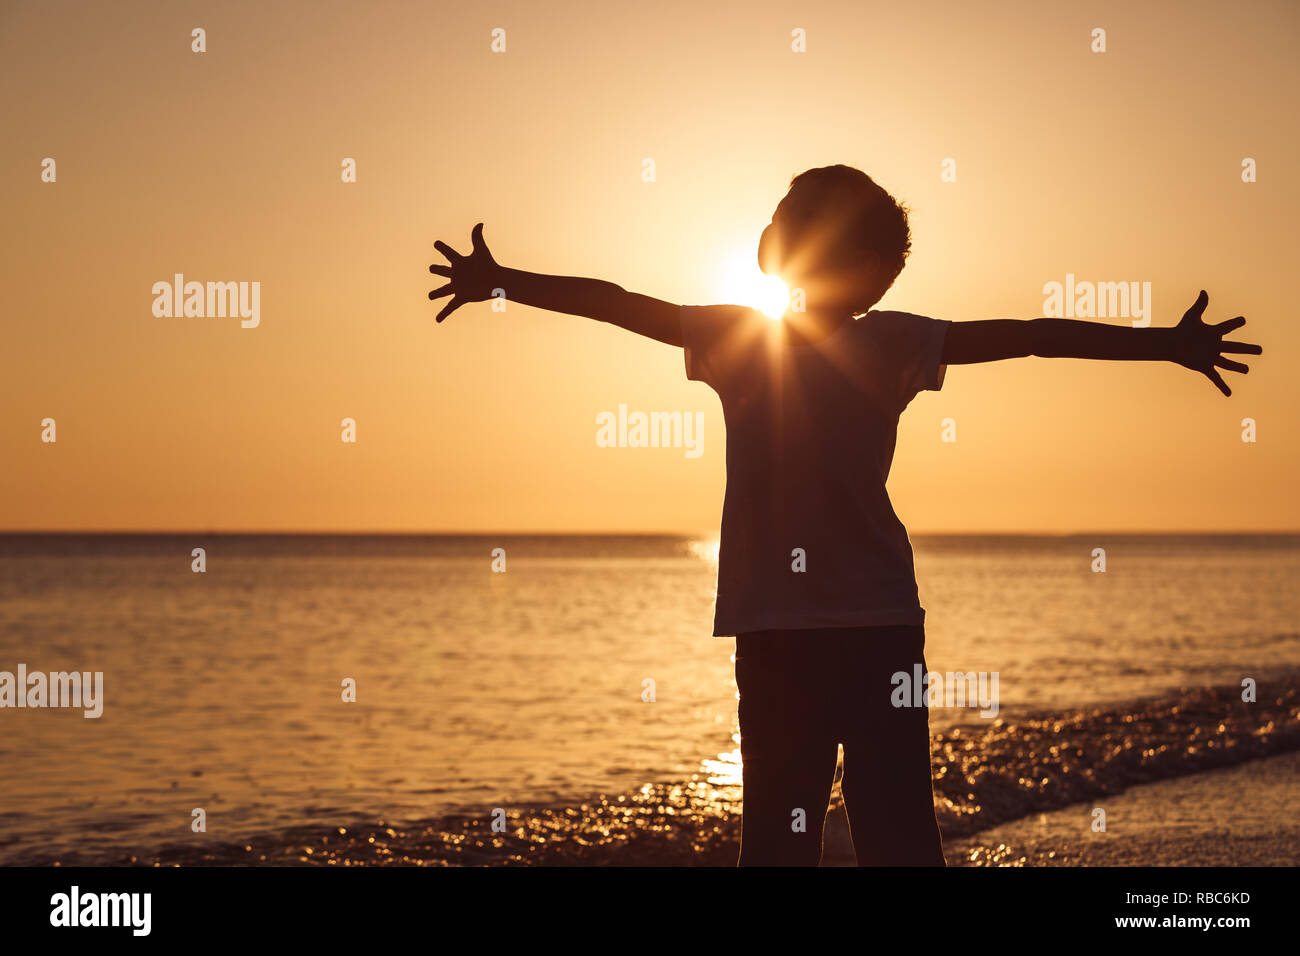 One happy little boy playing on the beach at the sunset time.  Kid having fun outdoors. Concept of summer vacation. Stock Photo